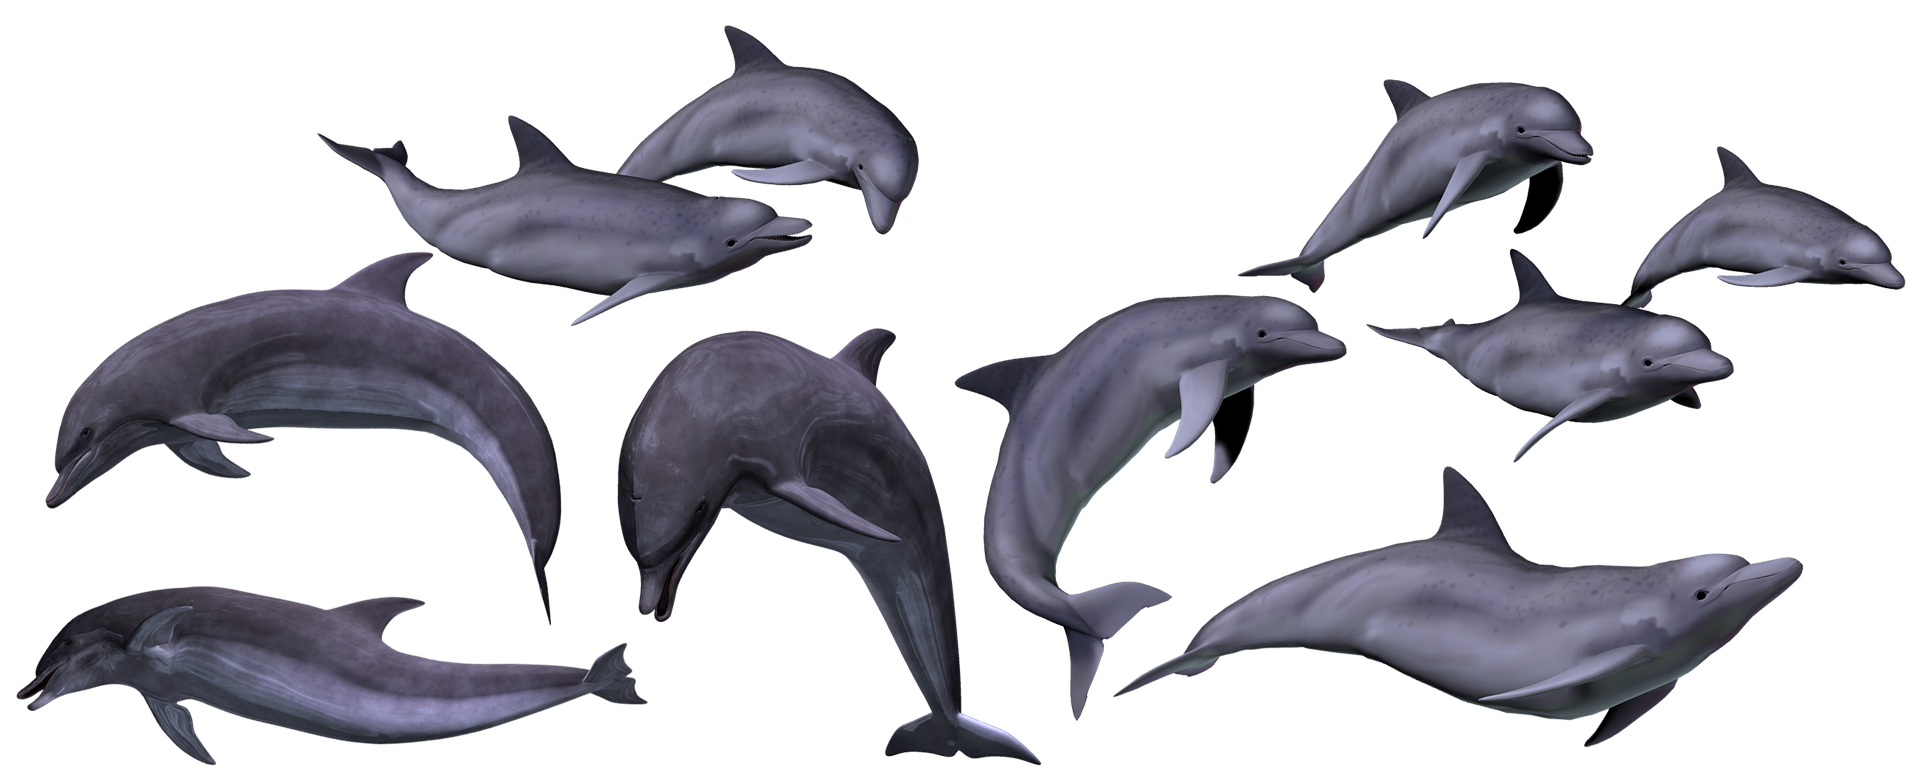 dolphins-g2063686ac_1920.png